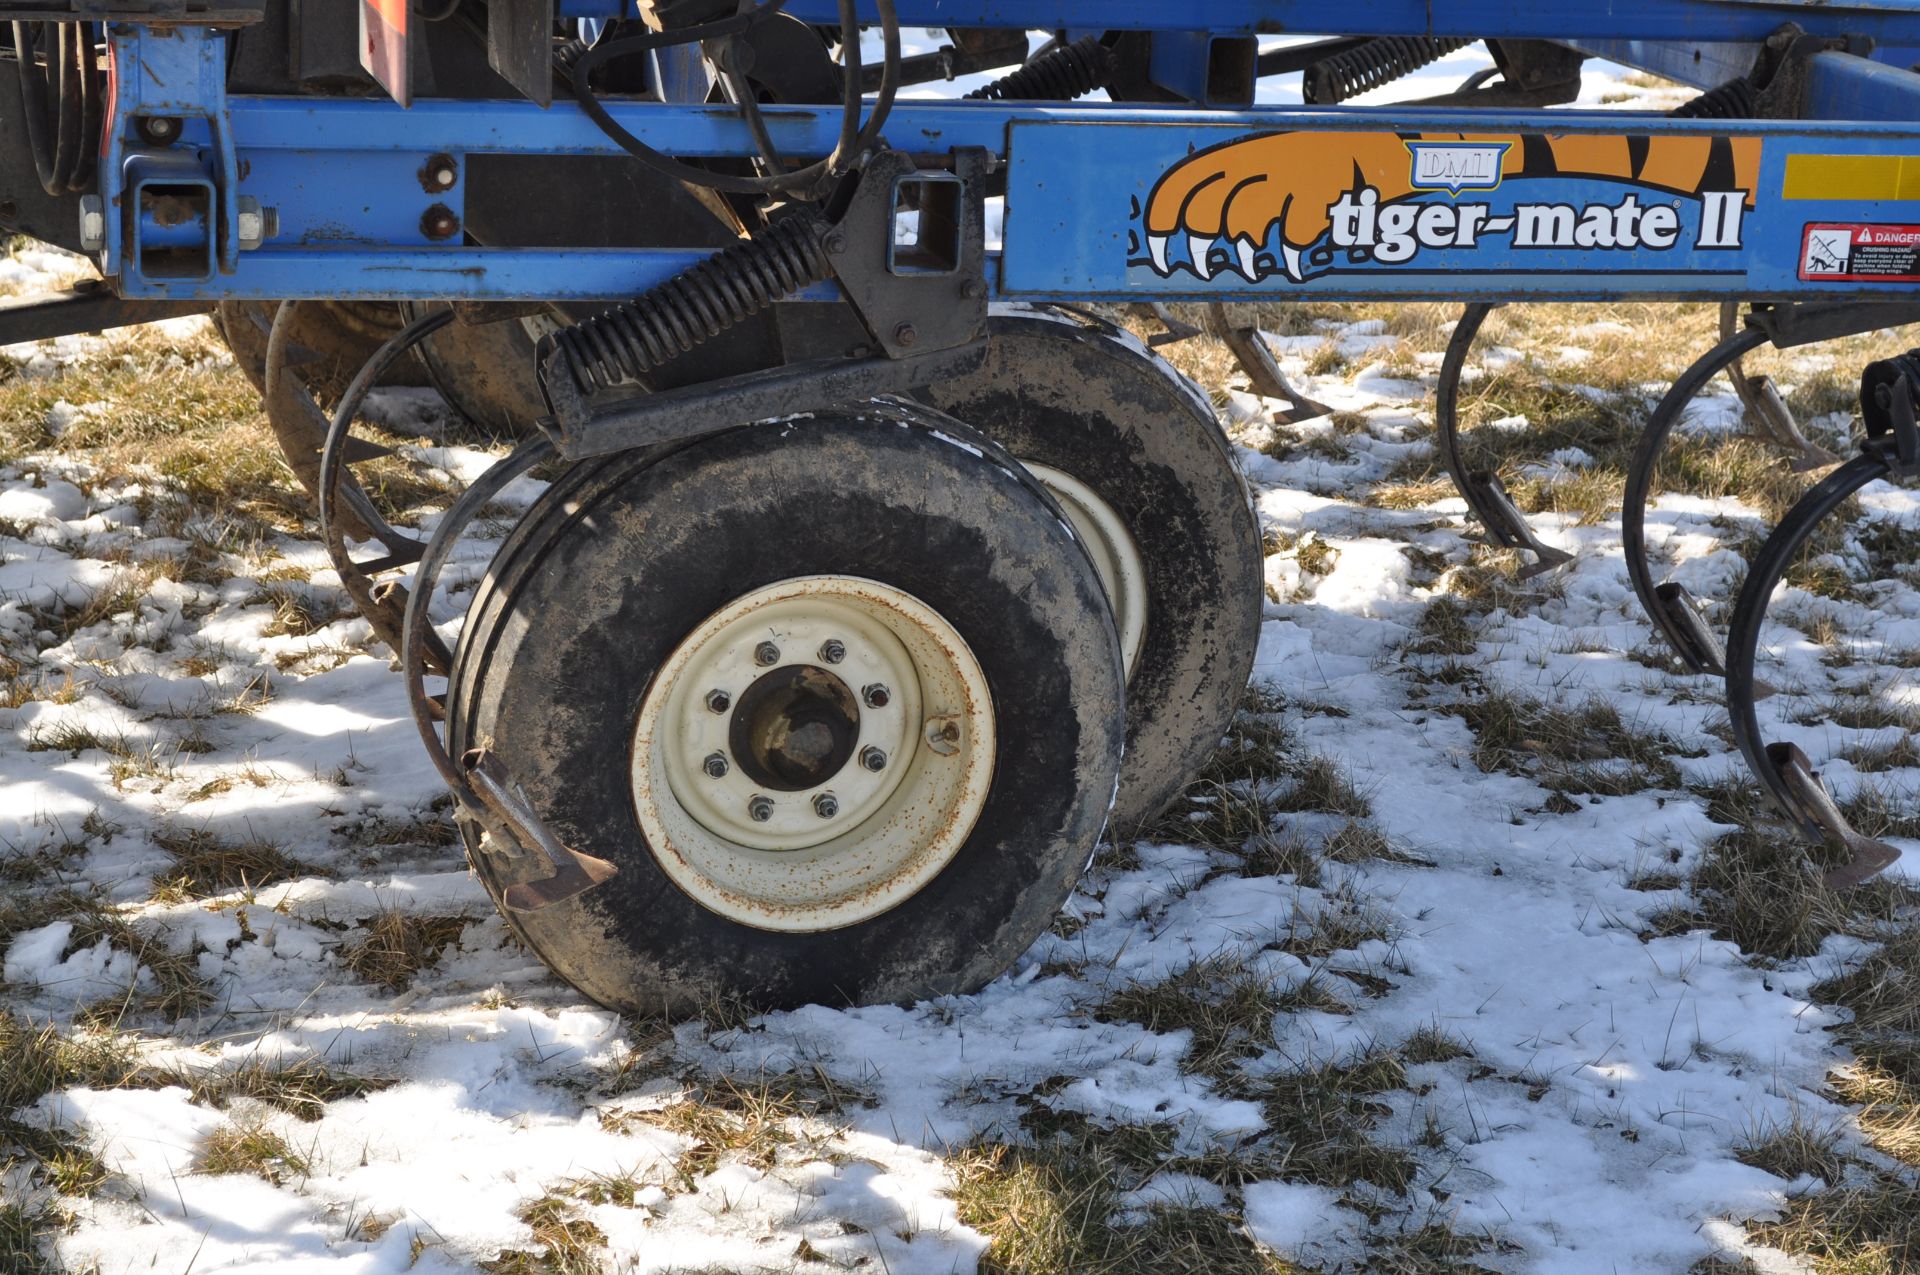 41’ DMI Tiger Mate II field cultivator, dble hyd fold, walking tandems, rear hitch, 4 bar spring - Image 19 of 21